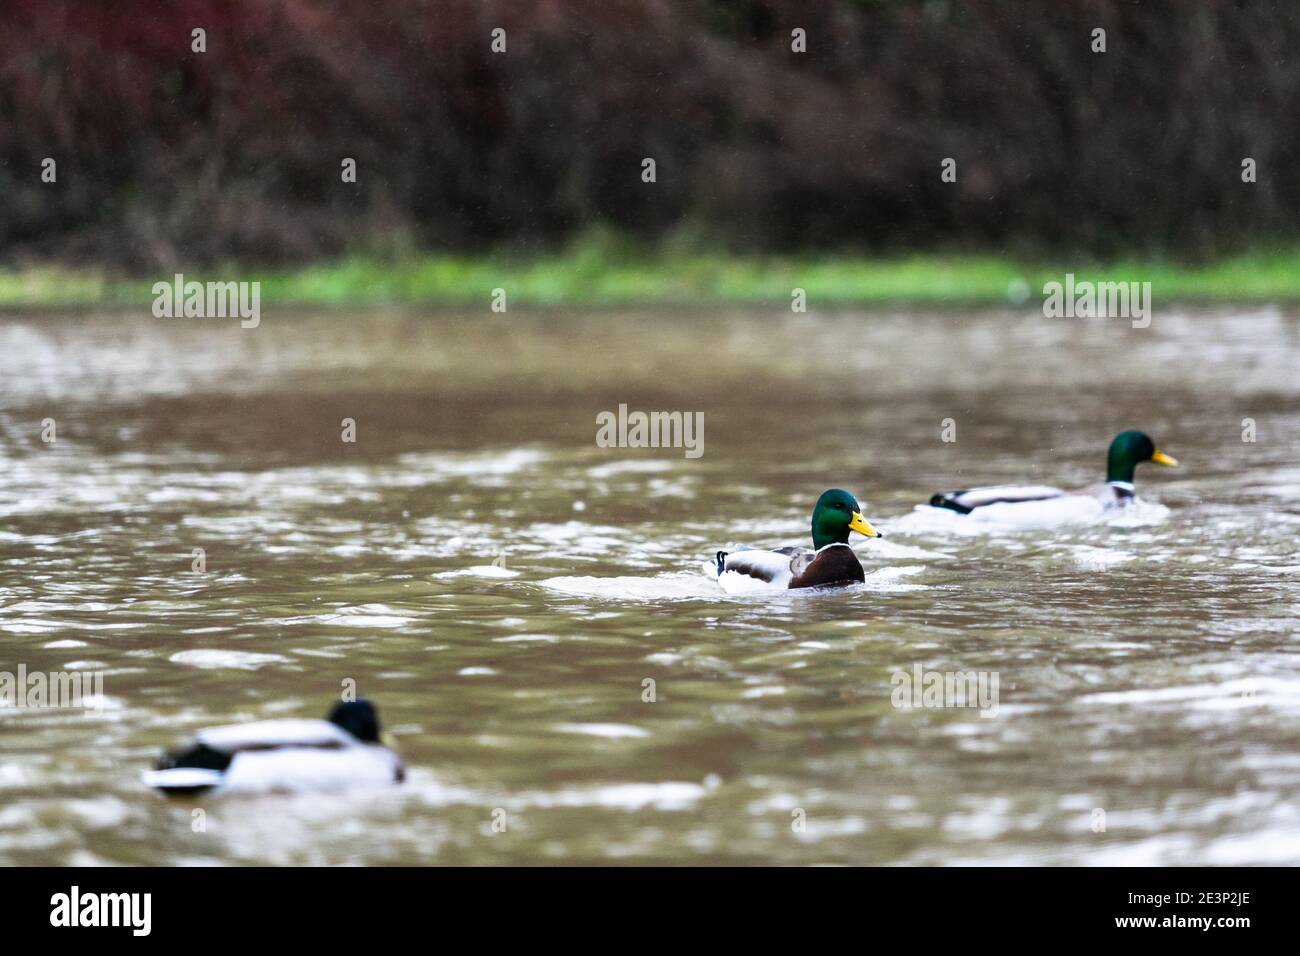 Ironbridge, Shropshire, UK. 20th Jan, 2020. As Storm Christoph threatens the UK with heavy rain and winds, ducks enjoy the weather on the River Severn by the historic Iron Bridge, Shropshire. Ironbridge village is regularly under flood after heavy rain falls in Wales. Credit: Peter Lopeman/Alamy Live News Stock Photo